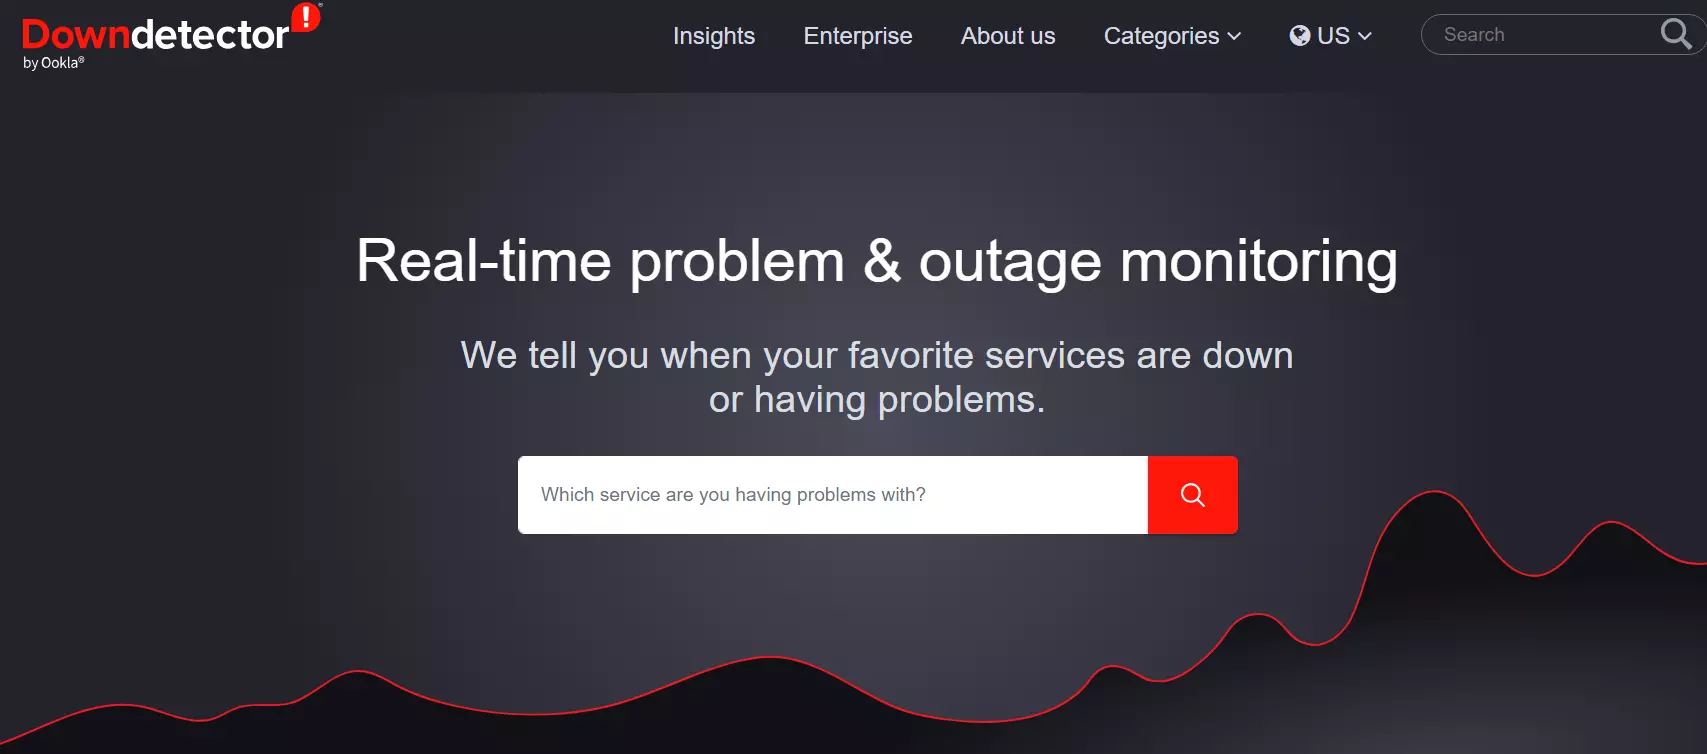 "Downdetector" website to check server outages